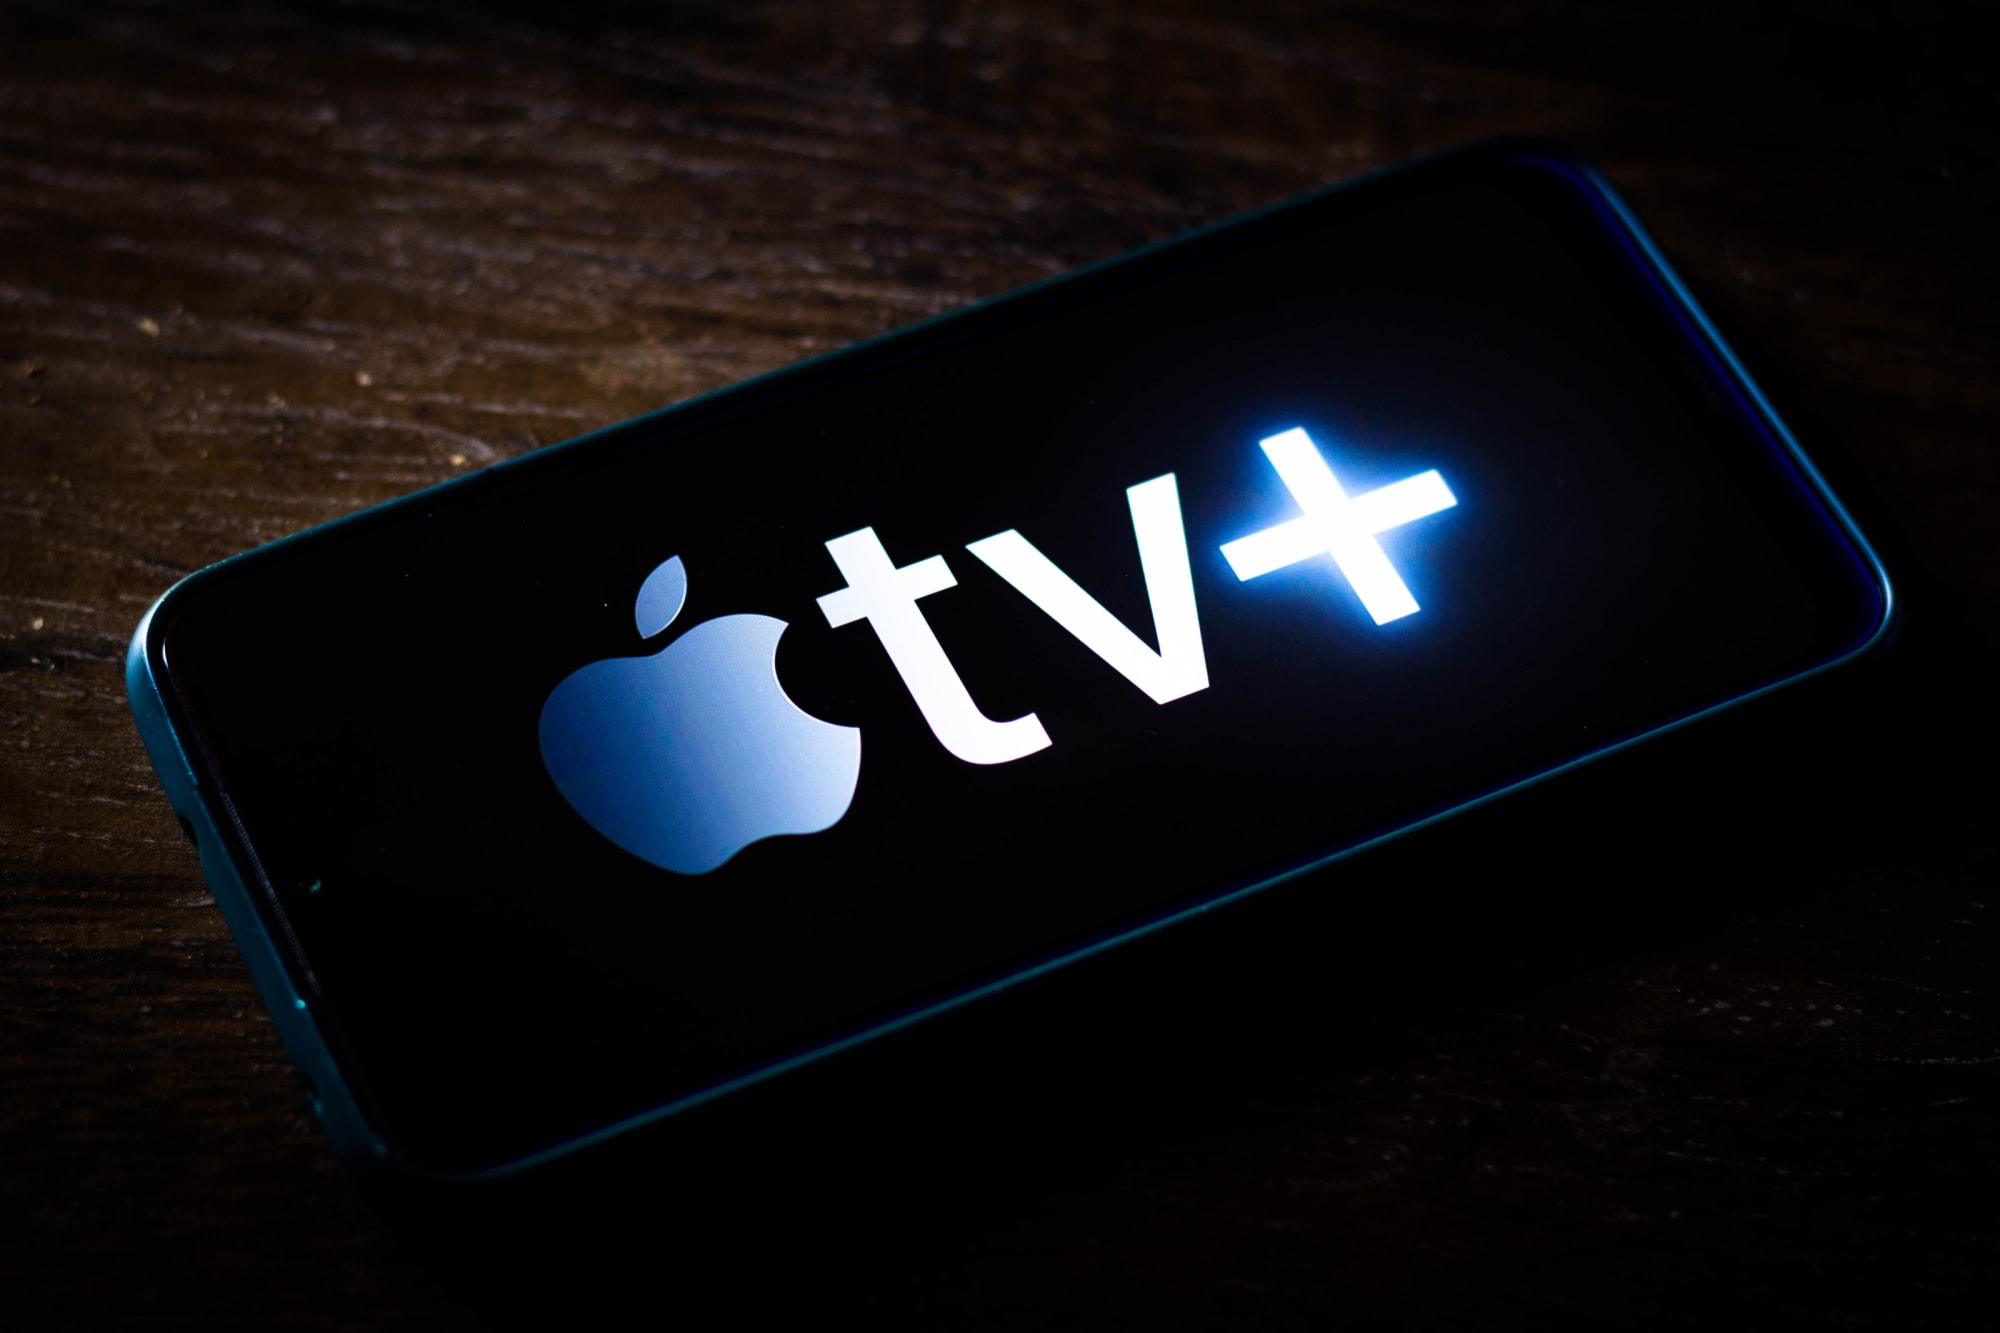 New Apple TV+ shows and movies Apple TV+ in March 2022 releases